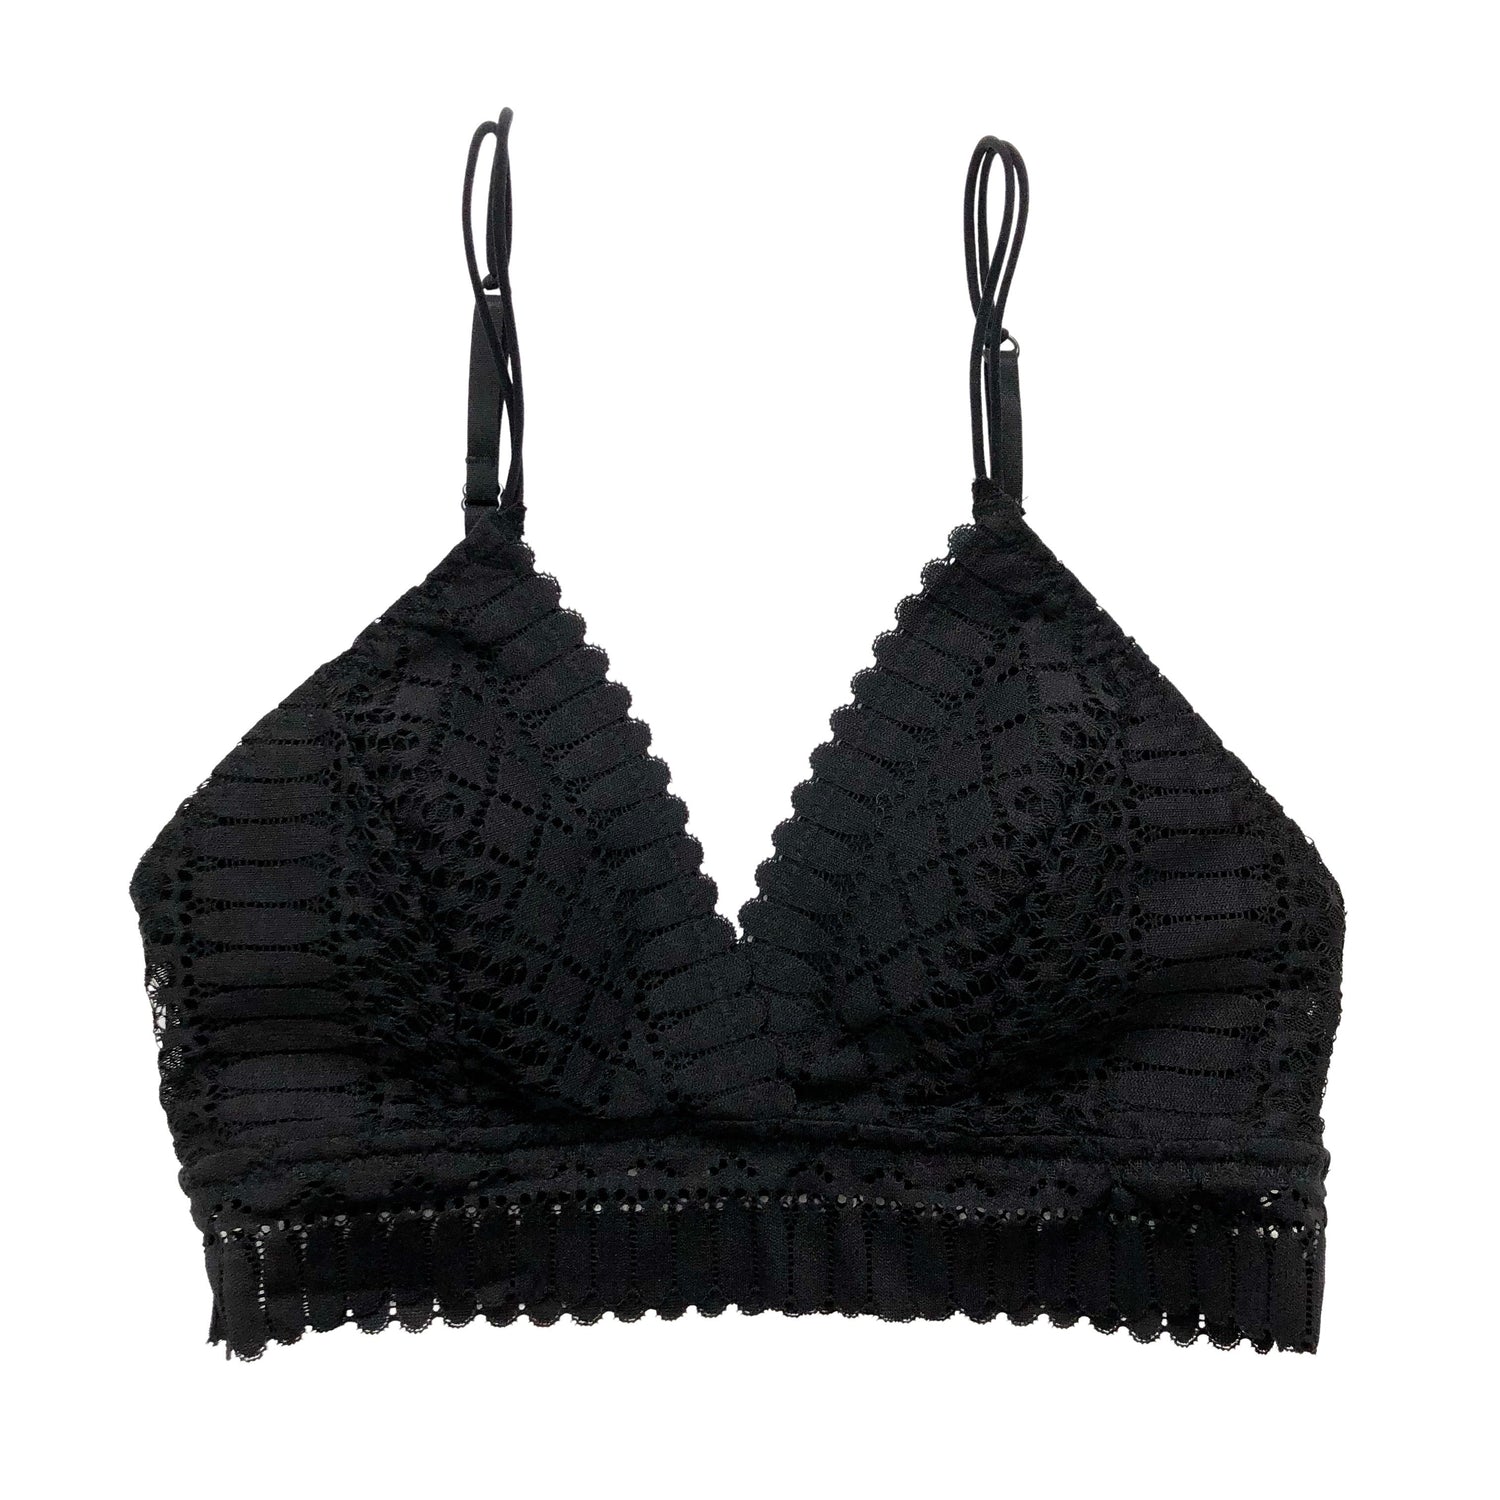 Limited Edition Black Lace Longline Bralette - 1215 Clothing